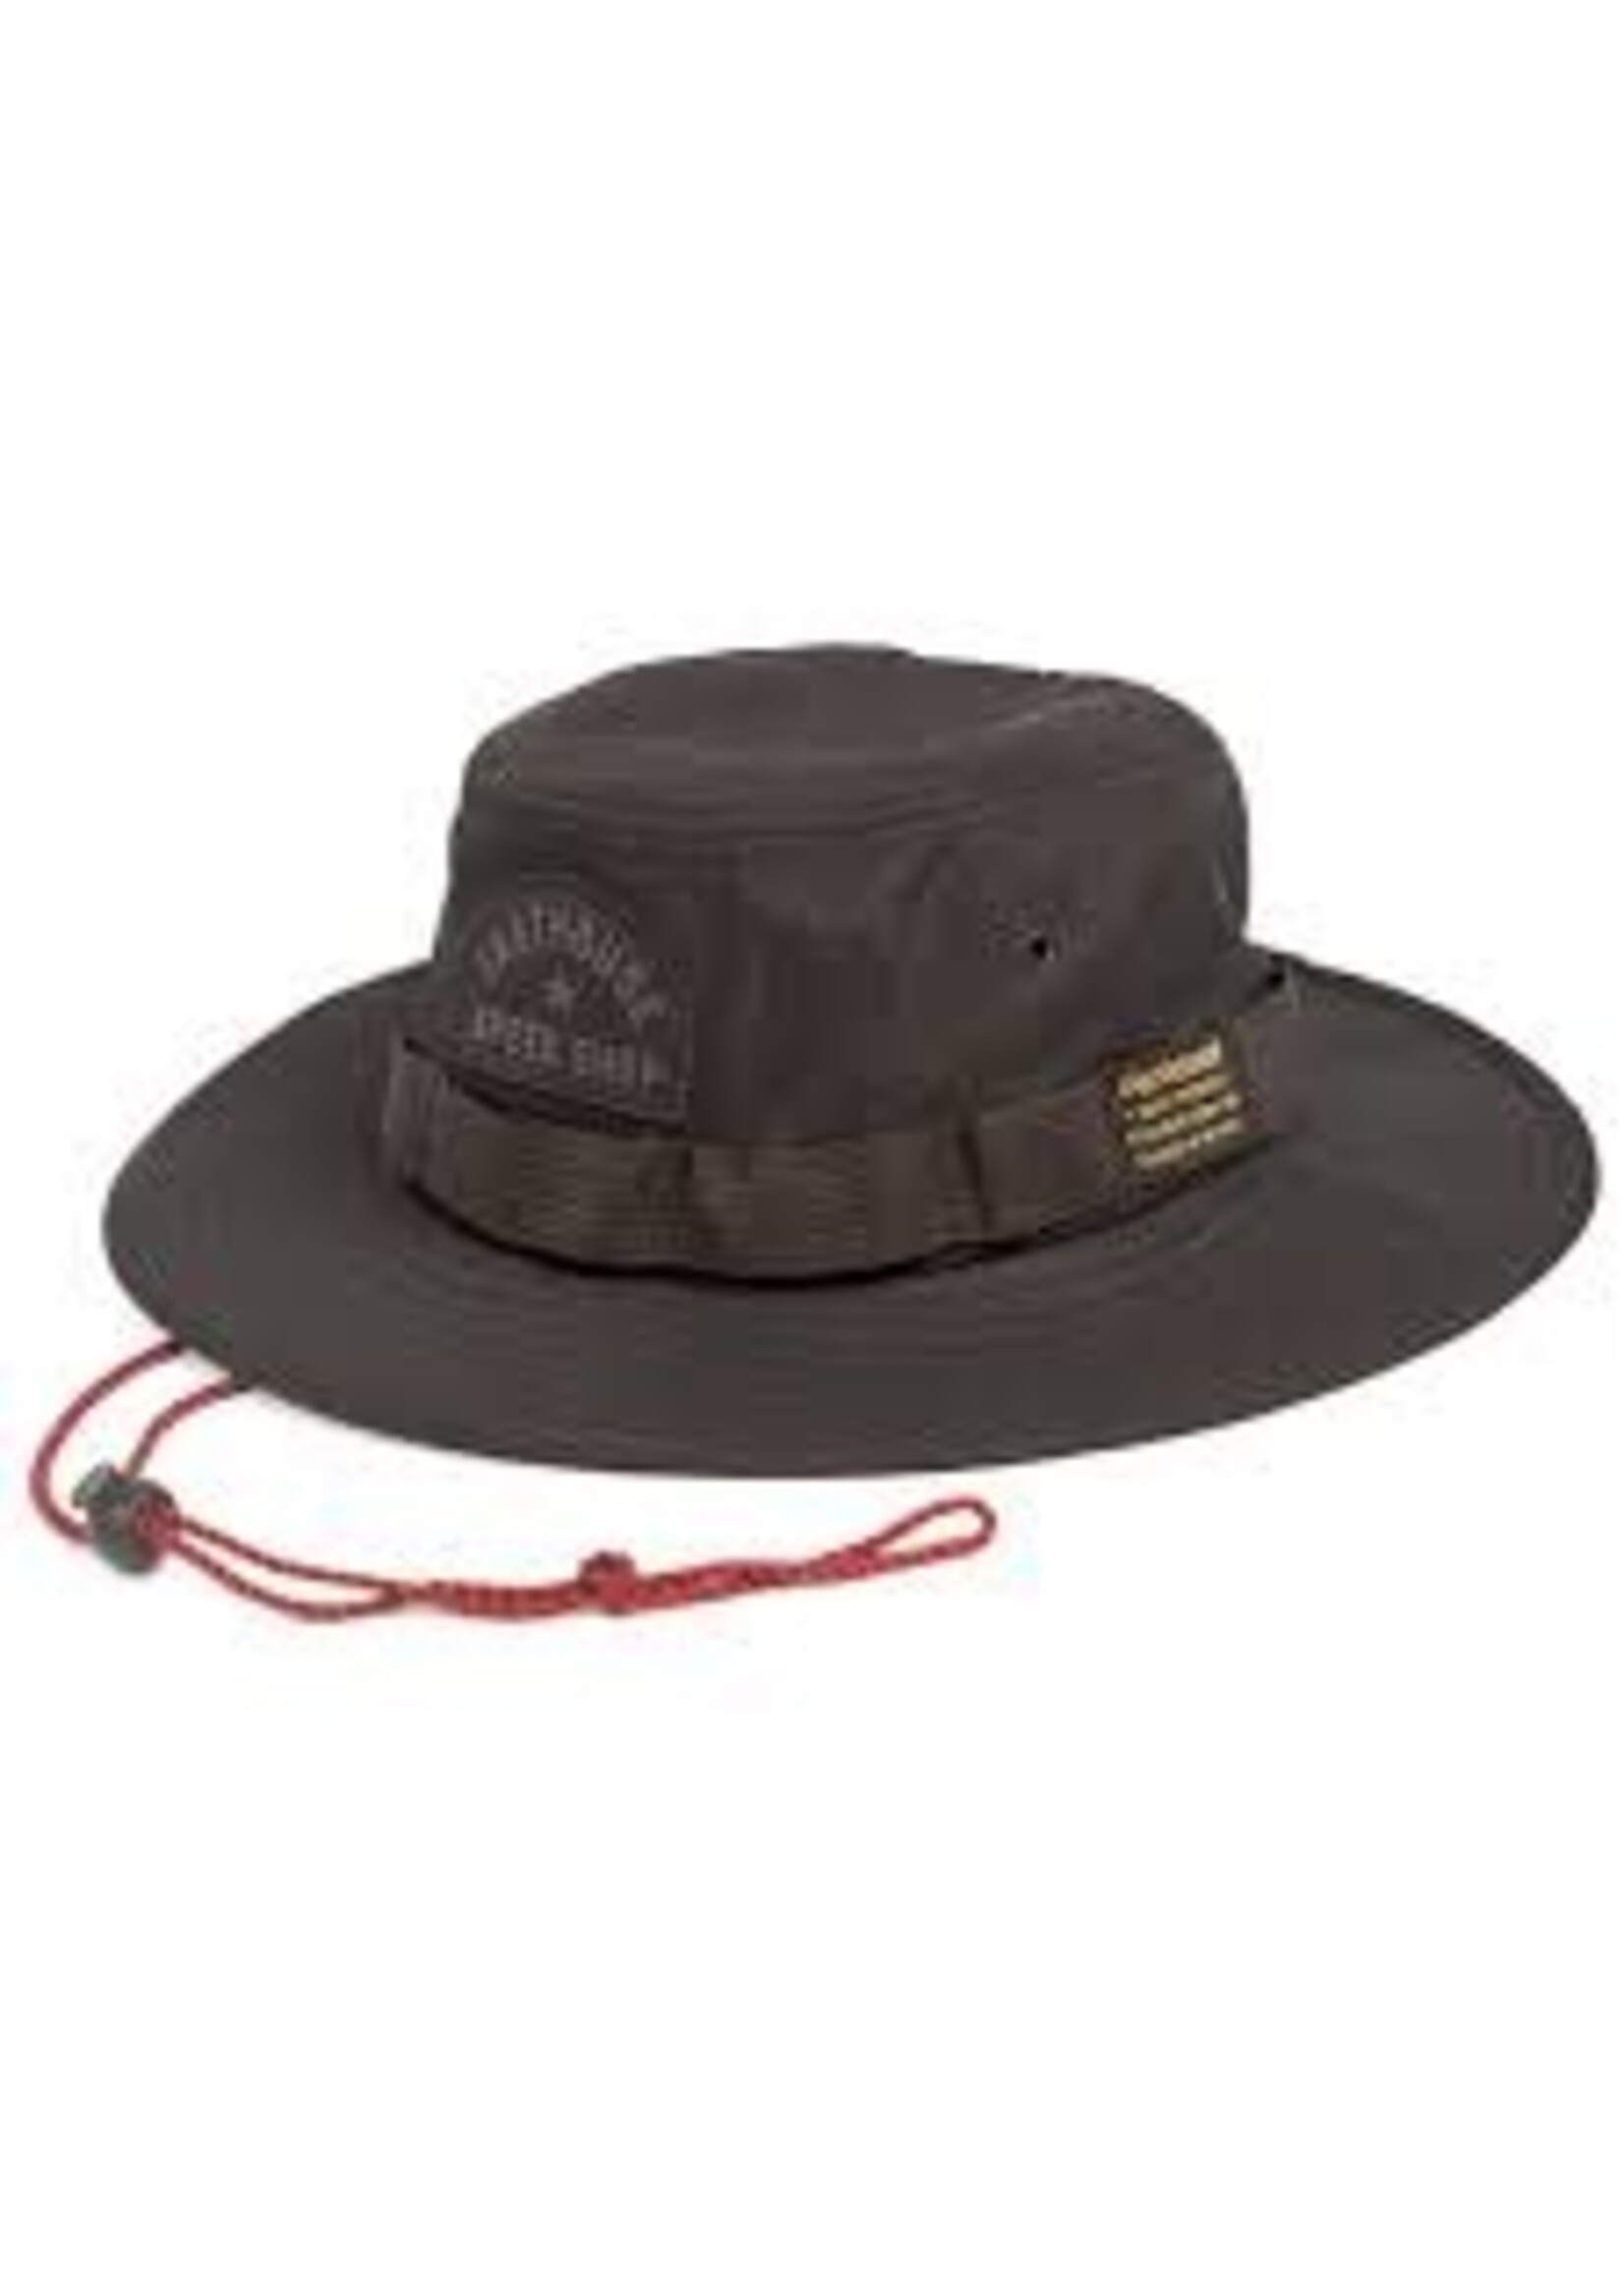 FASTHOUSE FASTHOUSE BRAVO BOONIE HAT [VINTAGE BLACK] ADULT